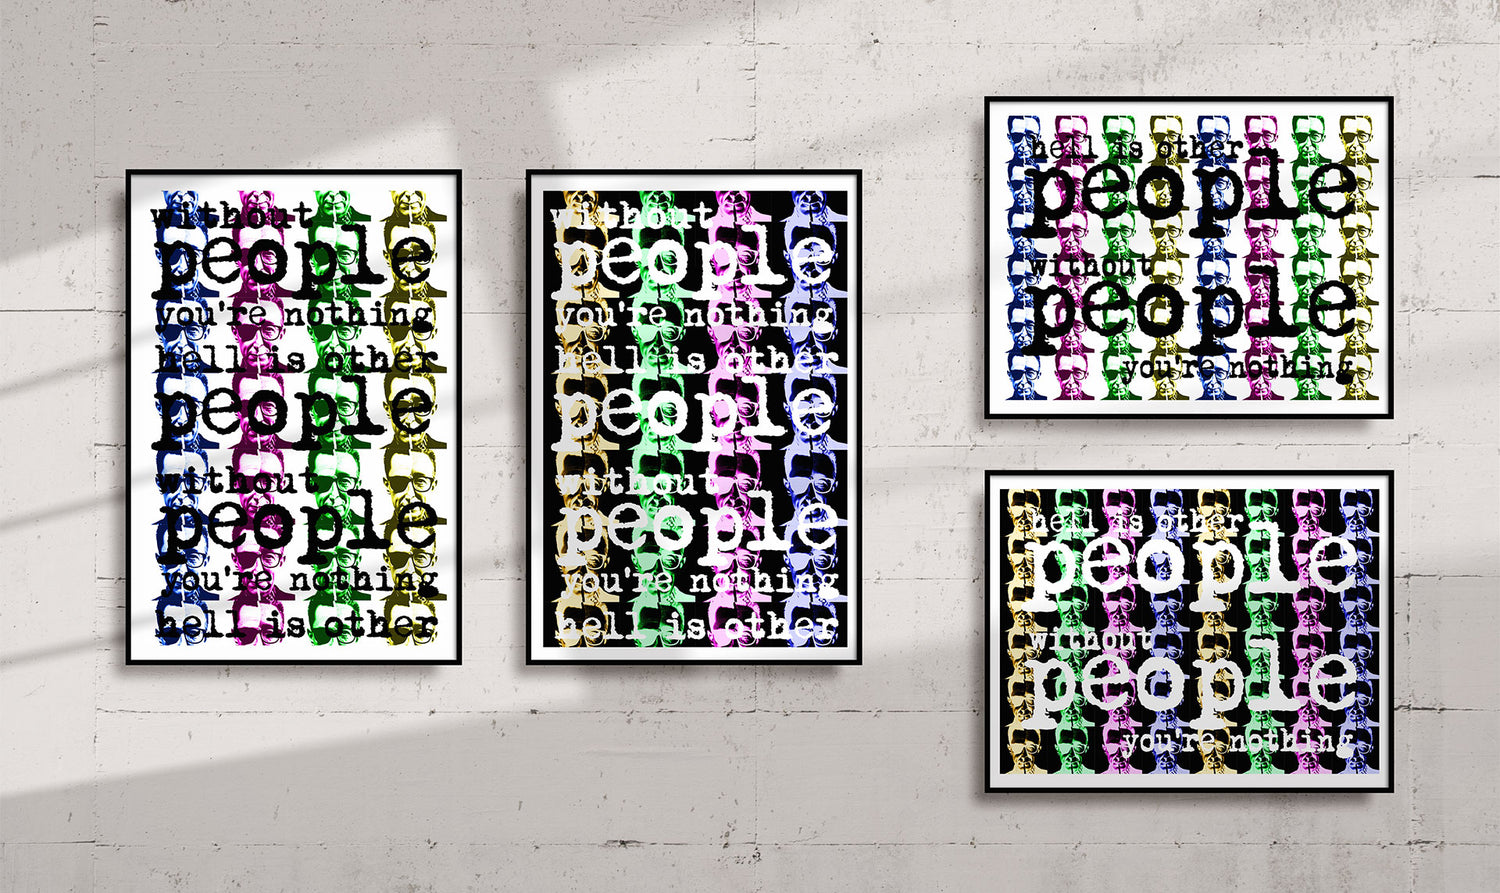 Collection of framed giclée prints hanging on a light concrete wall